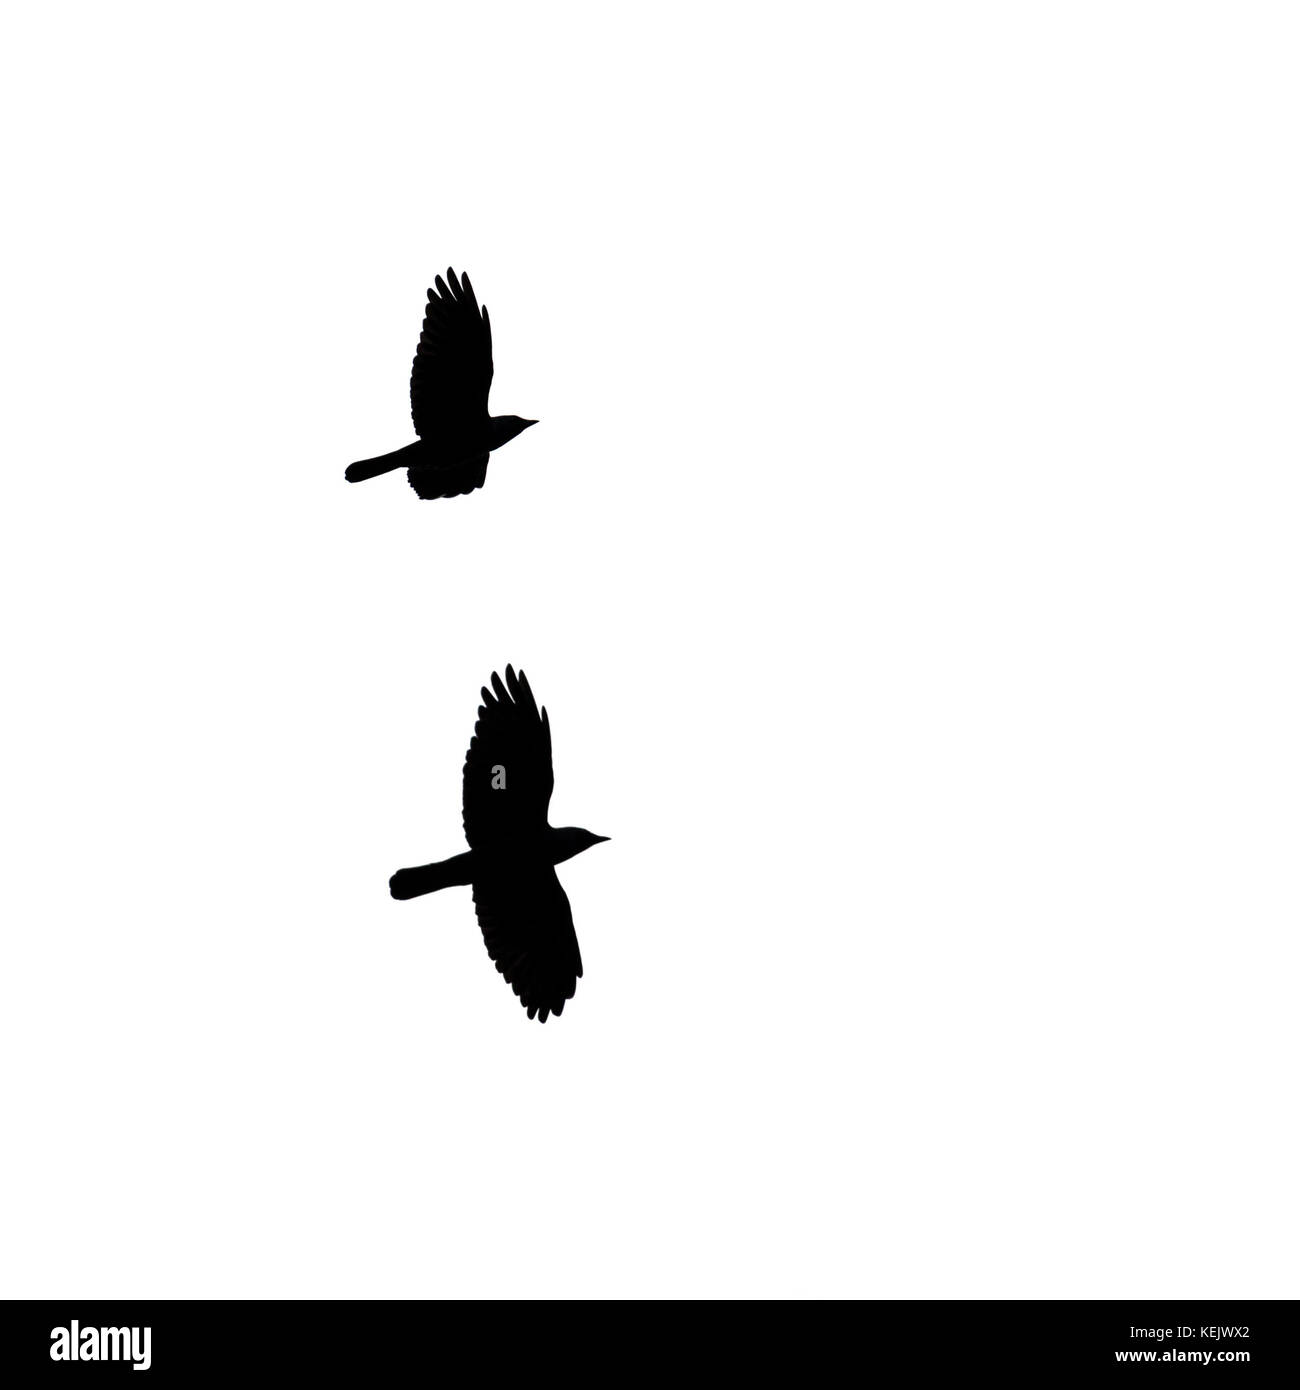 Two silhouetted crows flying across a white background. Stock Photo